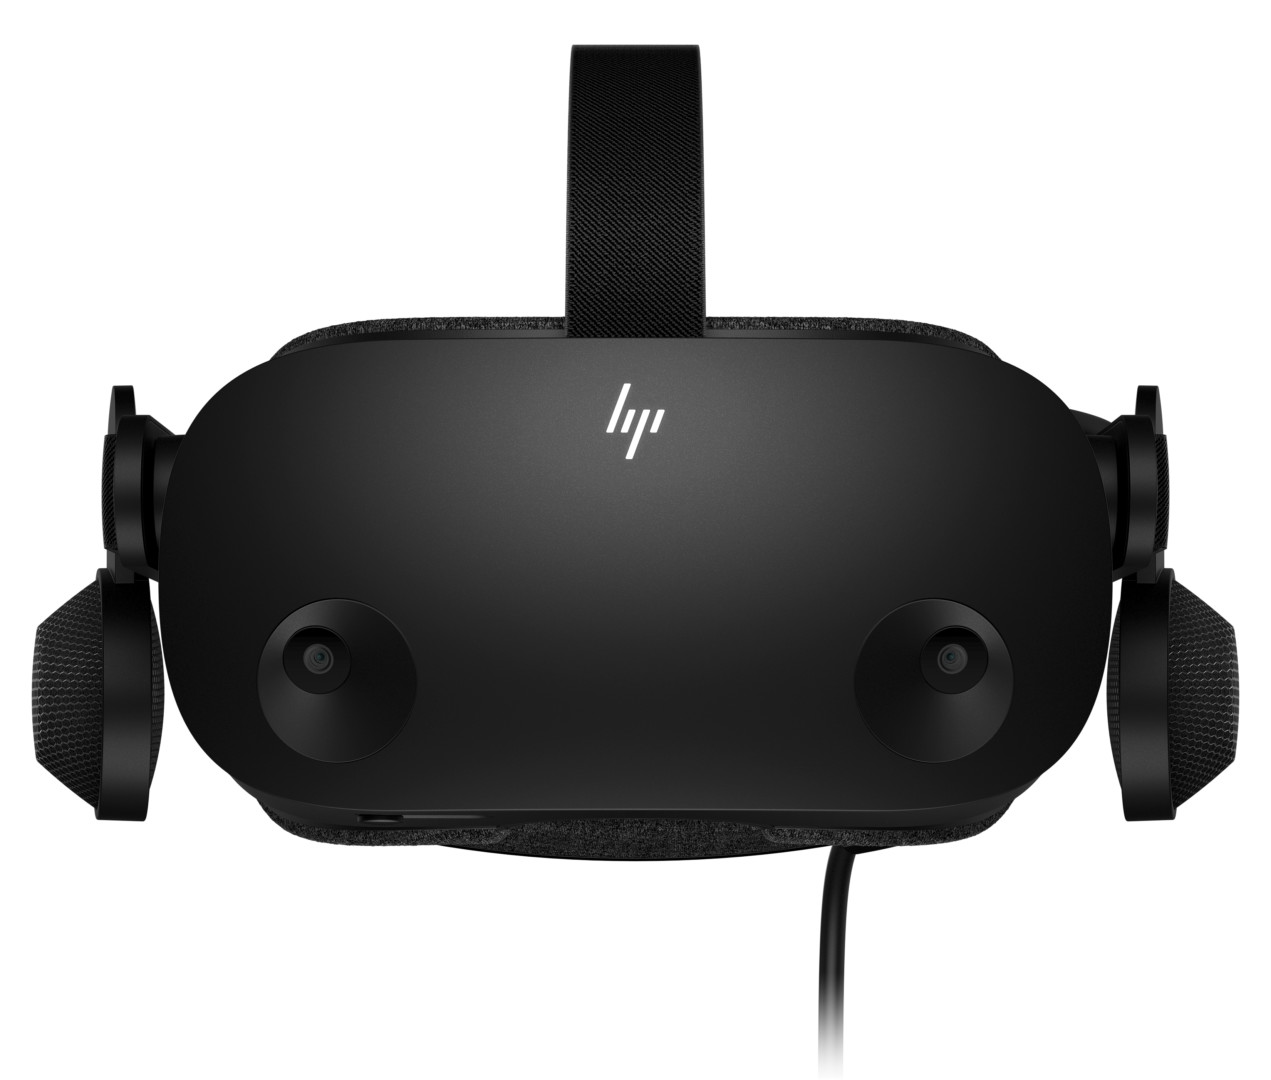 HP Reverb G2 virtual reality headset launches worldwide this fall